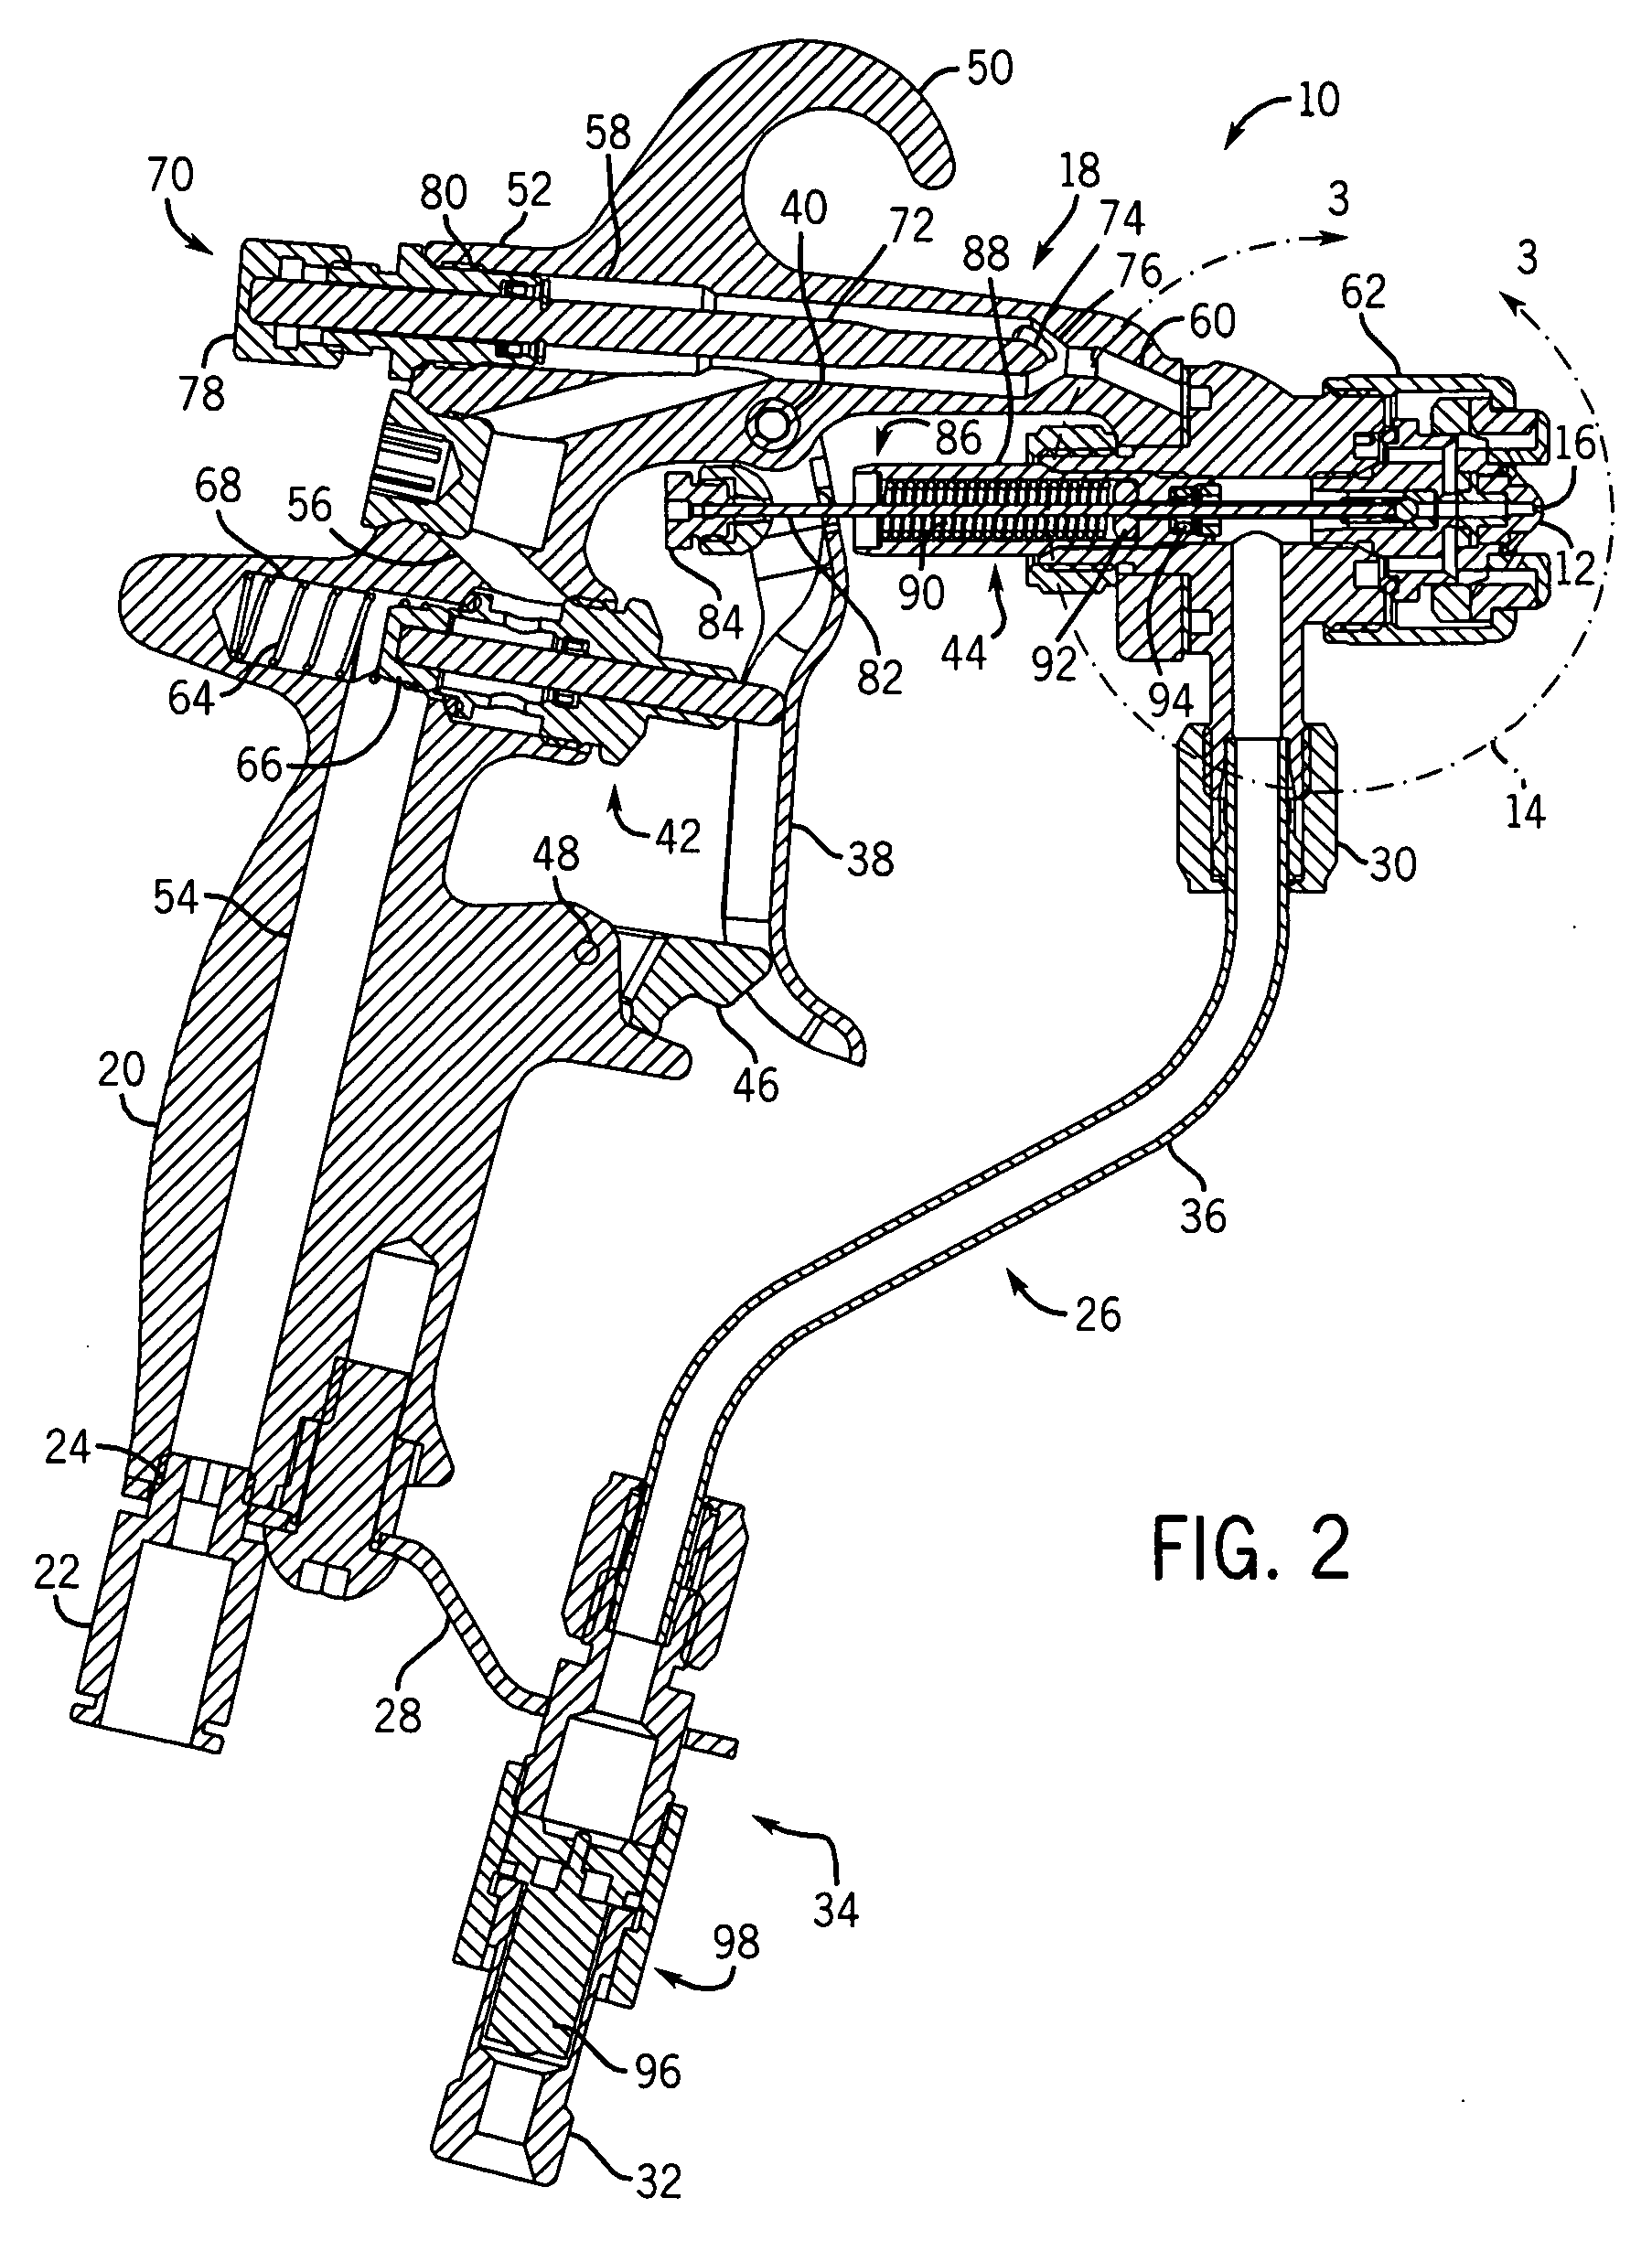 System and method of uniform spray coating